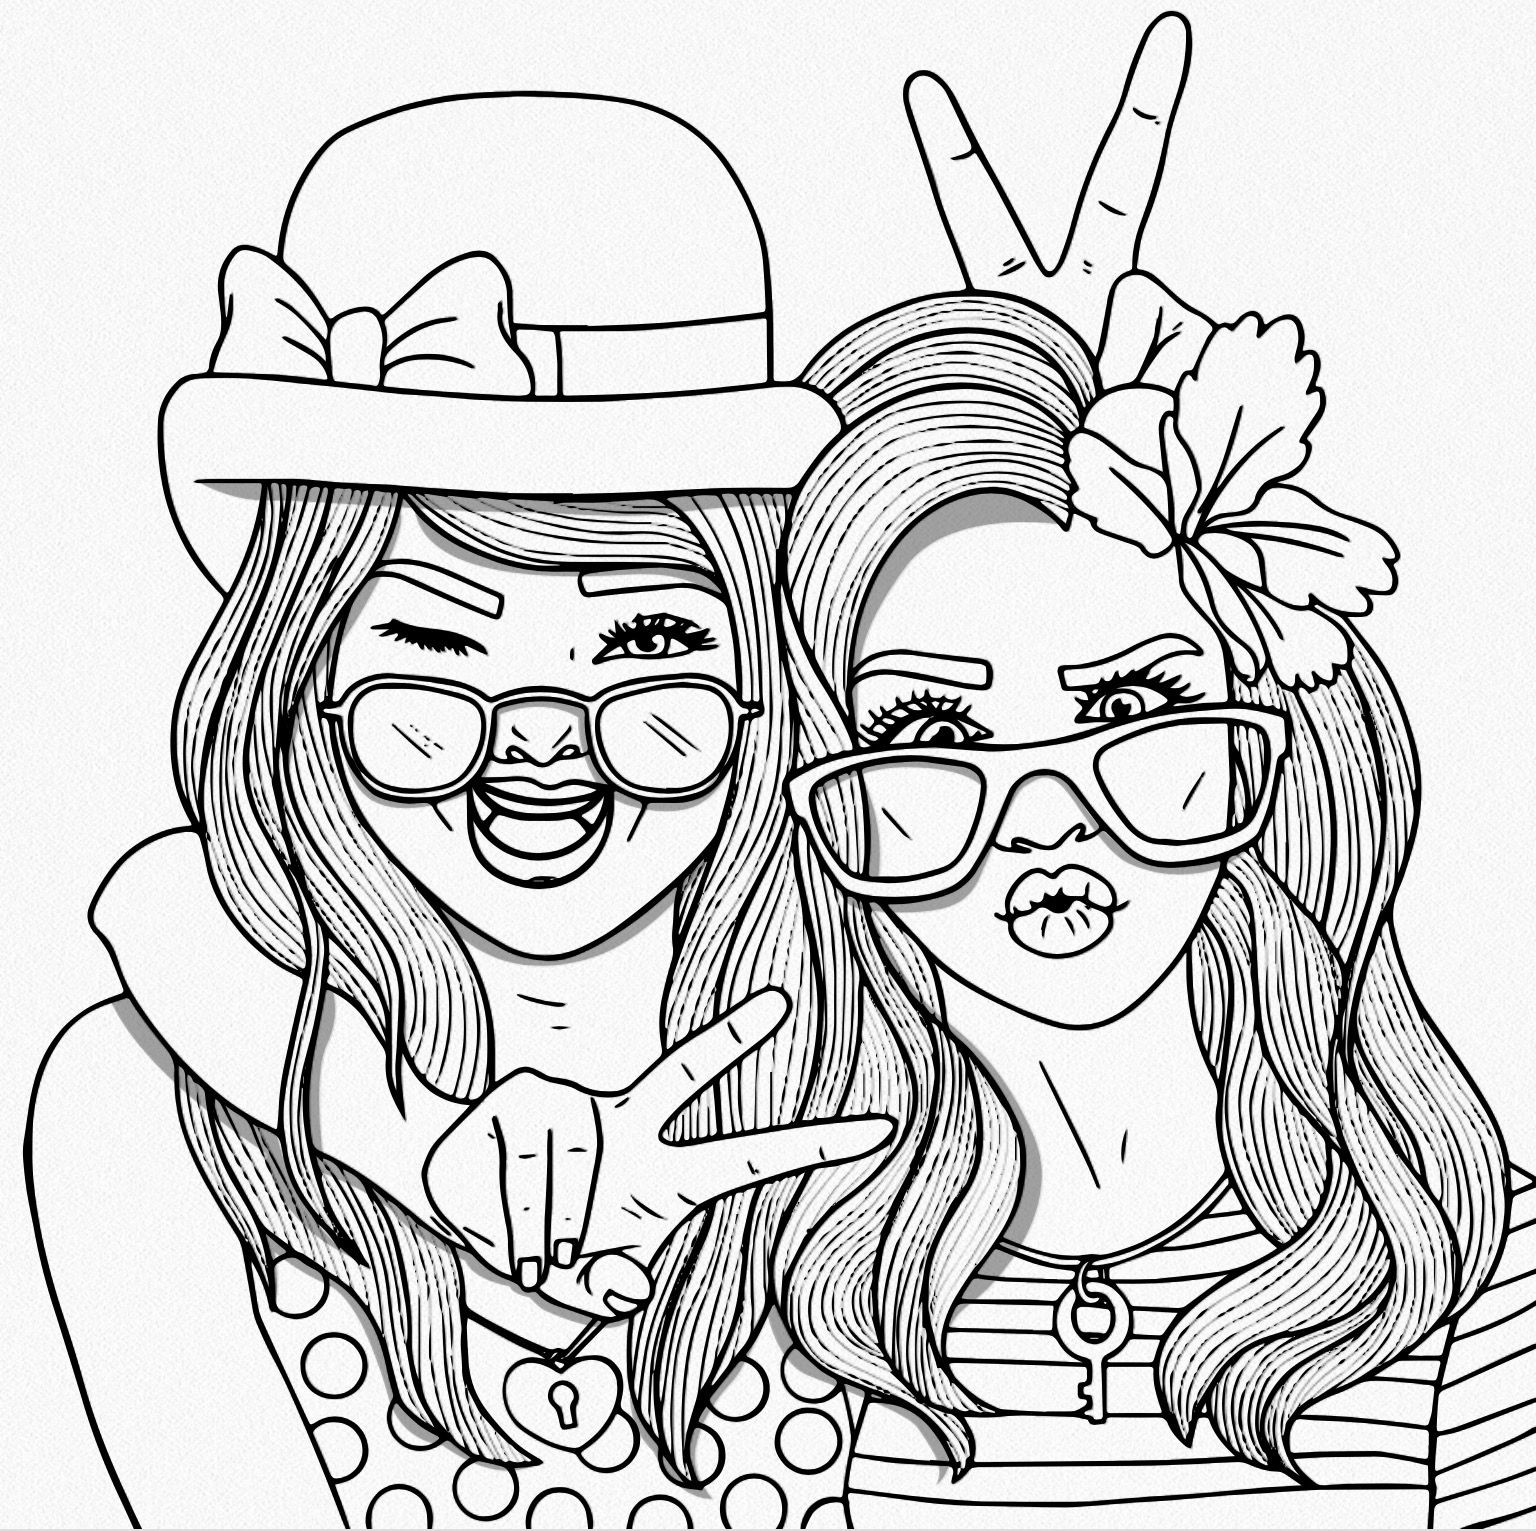 Best Friend Coloring Pages For Girls
 stress illustration life